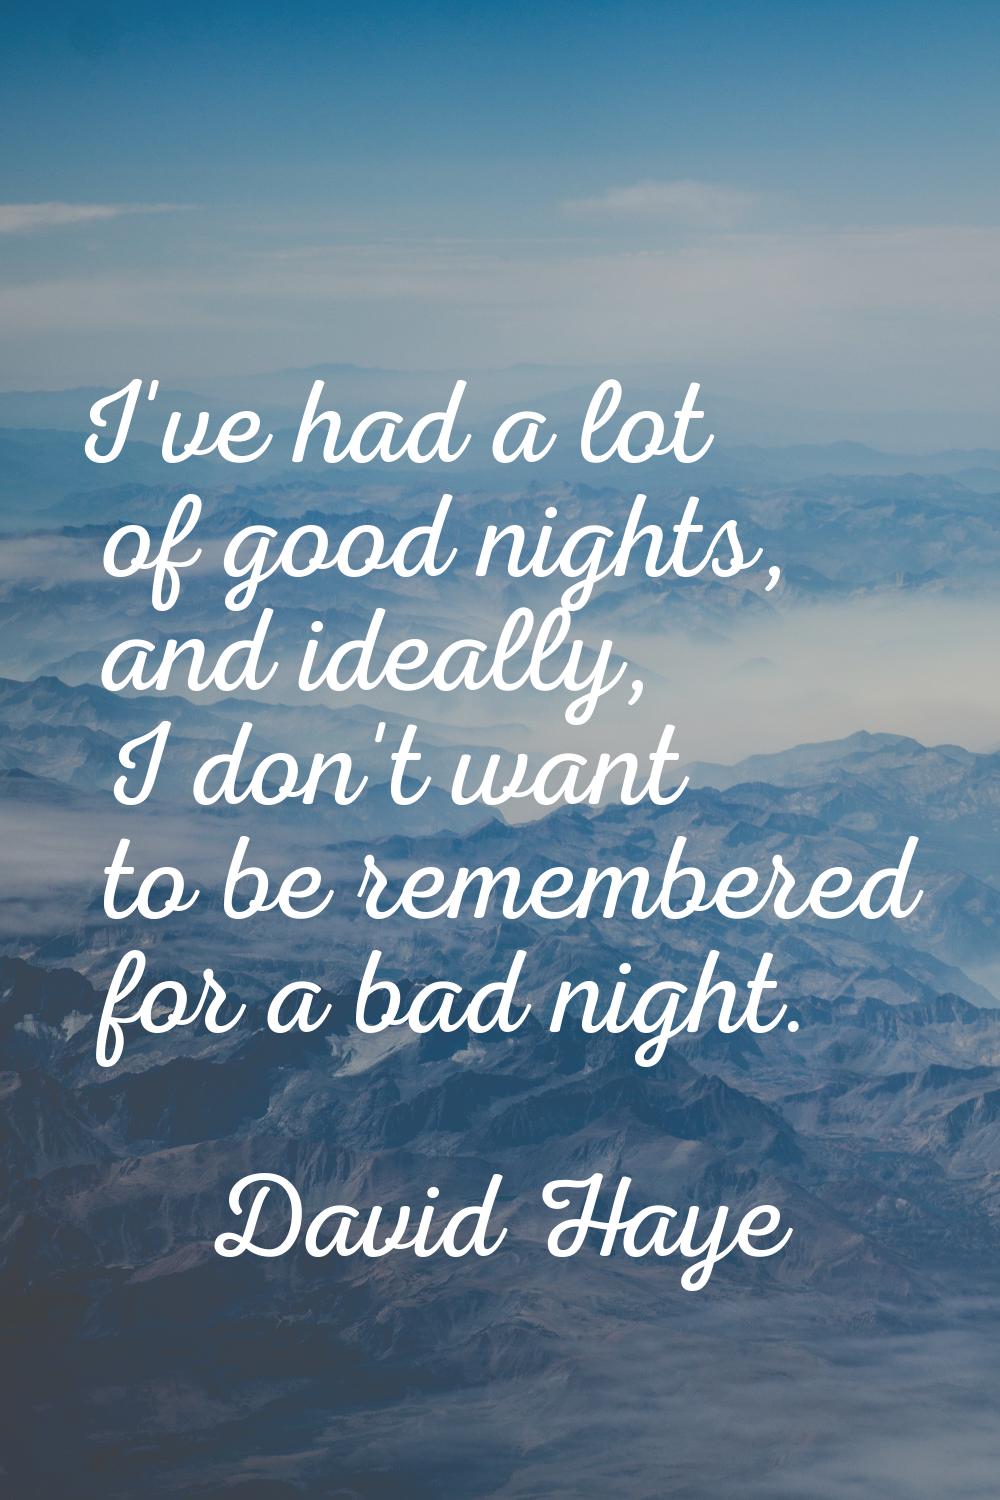 I've had a lot of good nights, and ideally, I don't want to be remembered for a bad night.